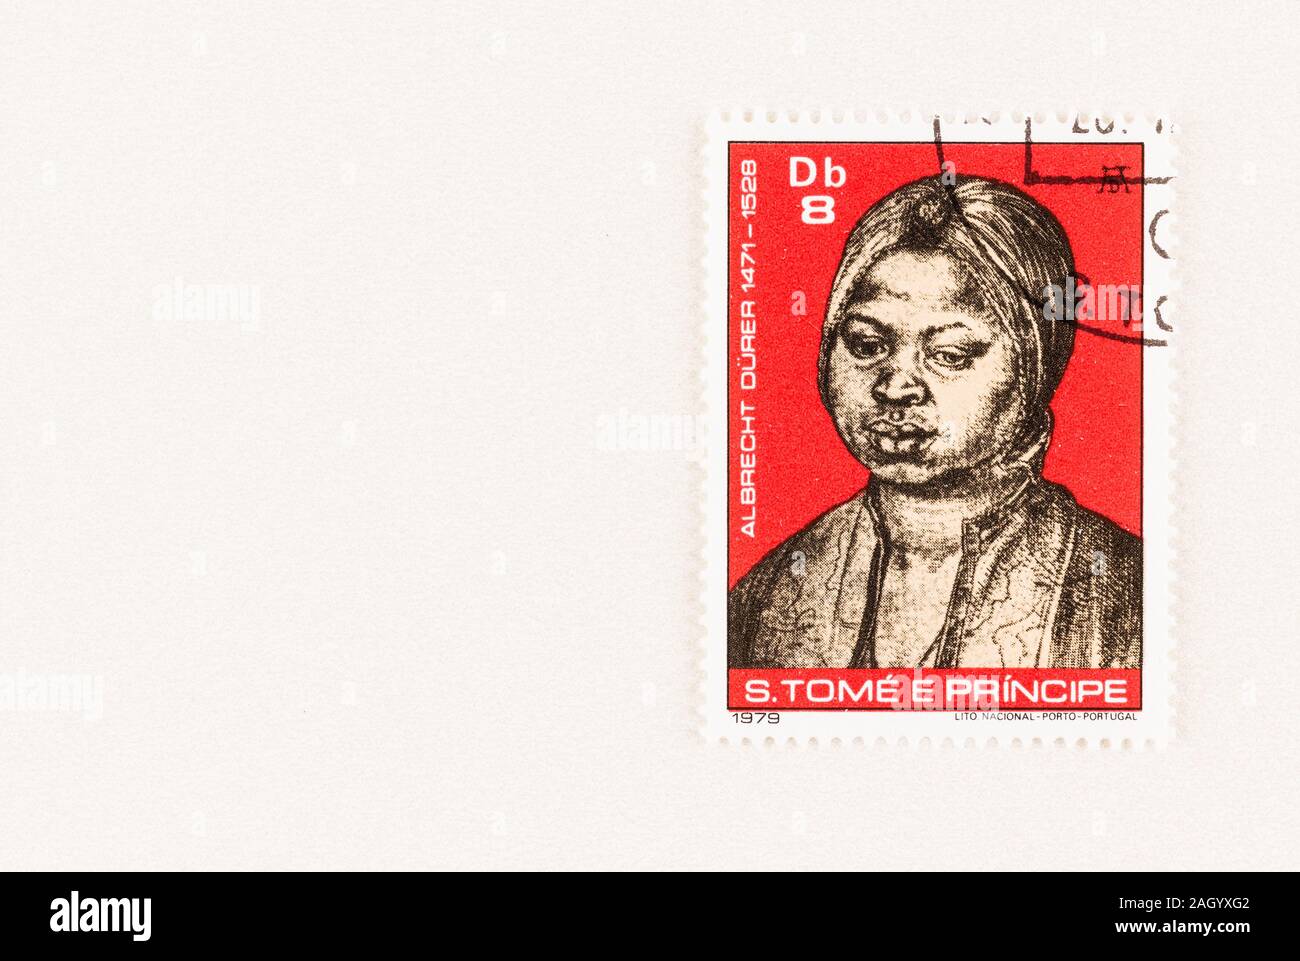 SEATTLE WASHINGTON - October 5, 2019: Portrait of 1521  by Albrecht Durer  of a Moorish woman on a Sao Tome and Principe postage stamp issued in 1979. Stock Photo